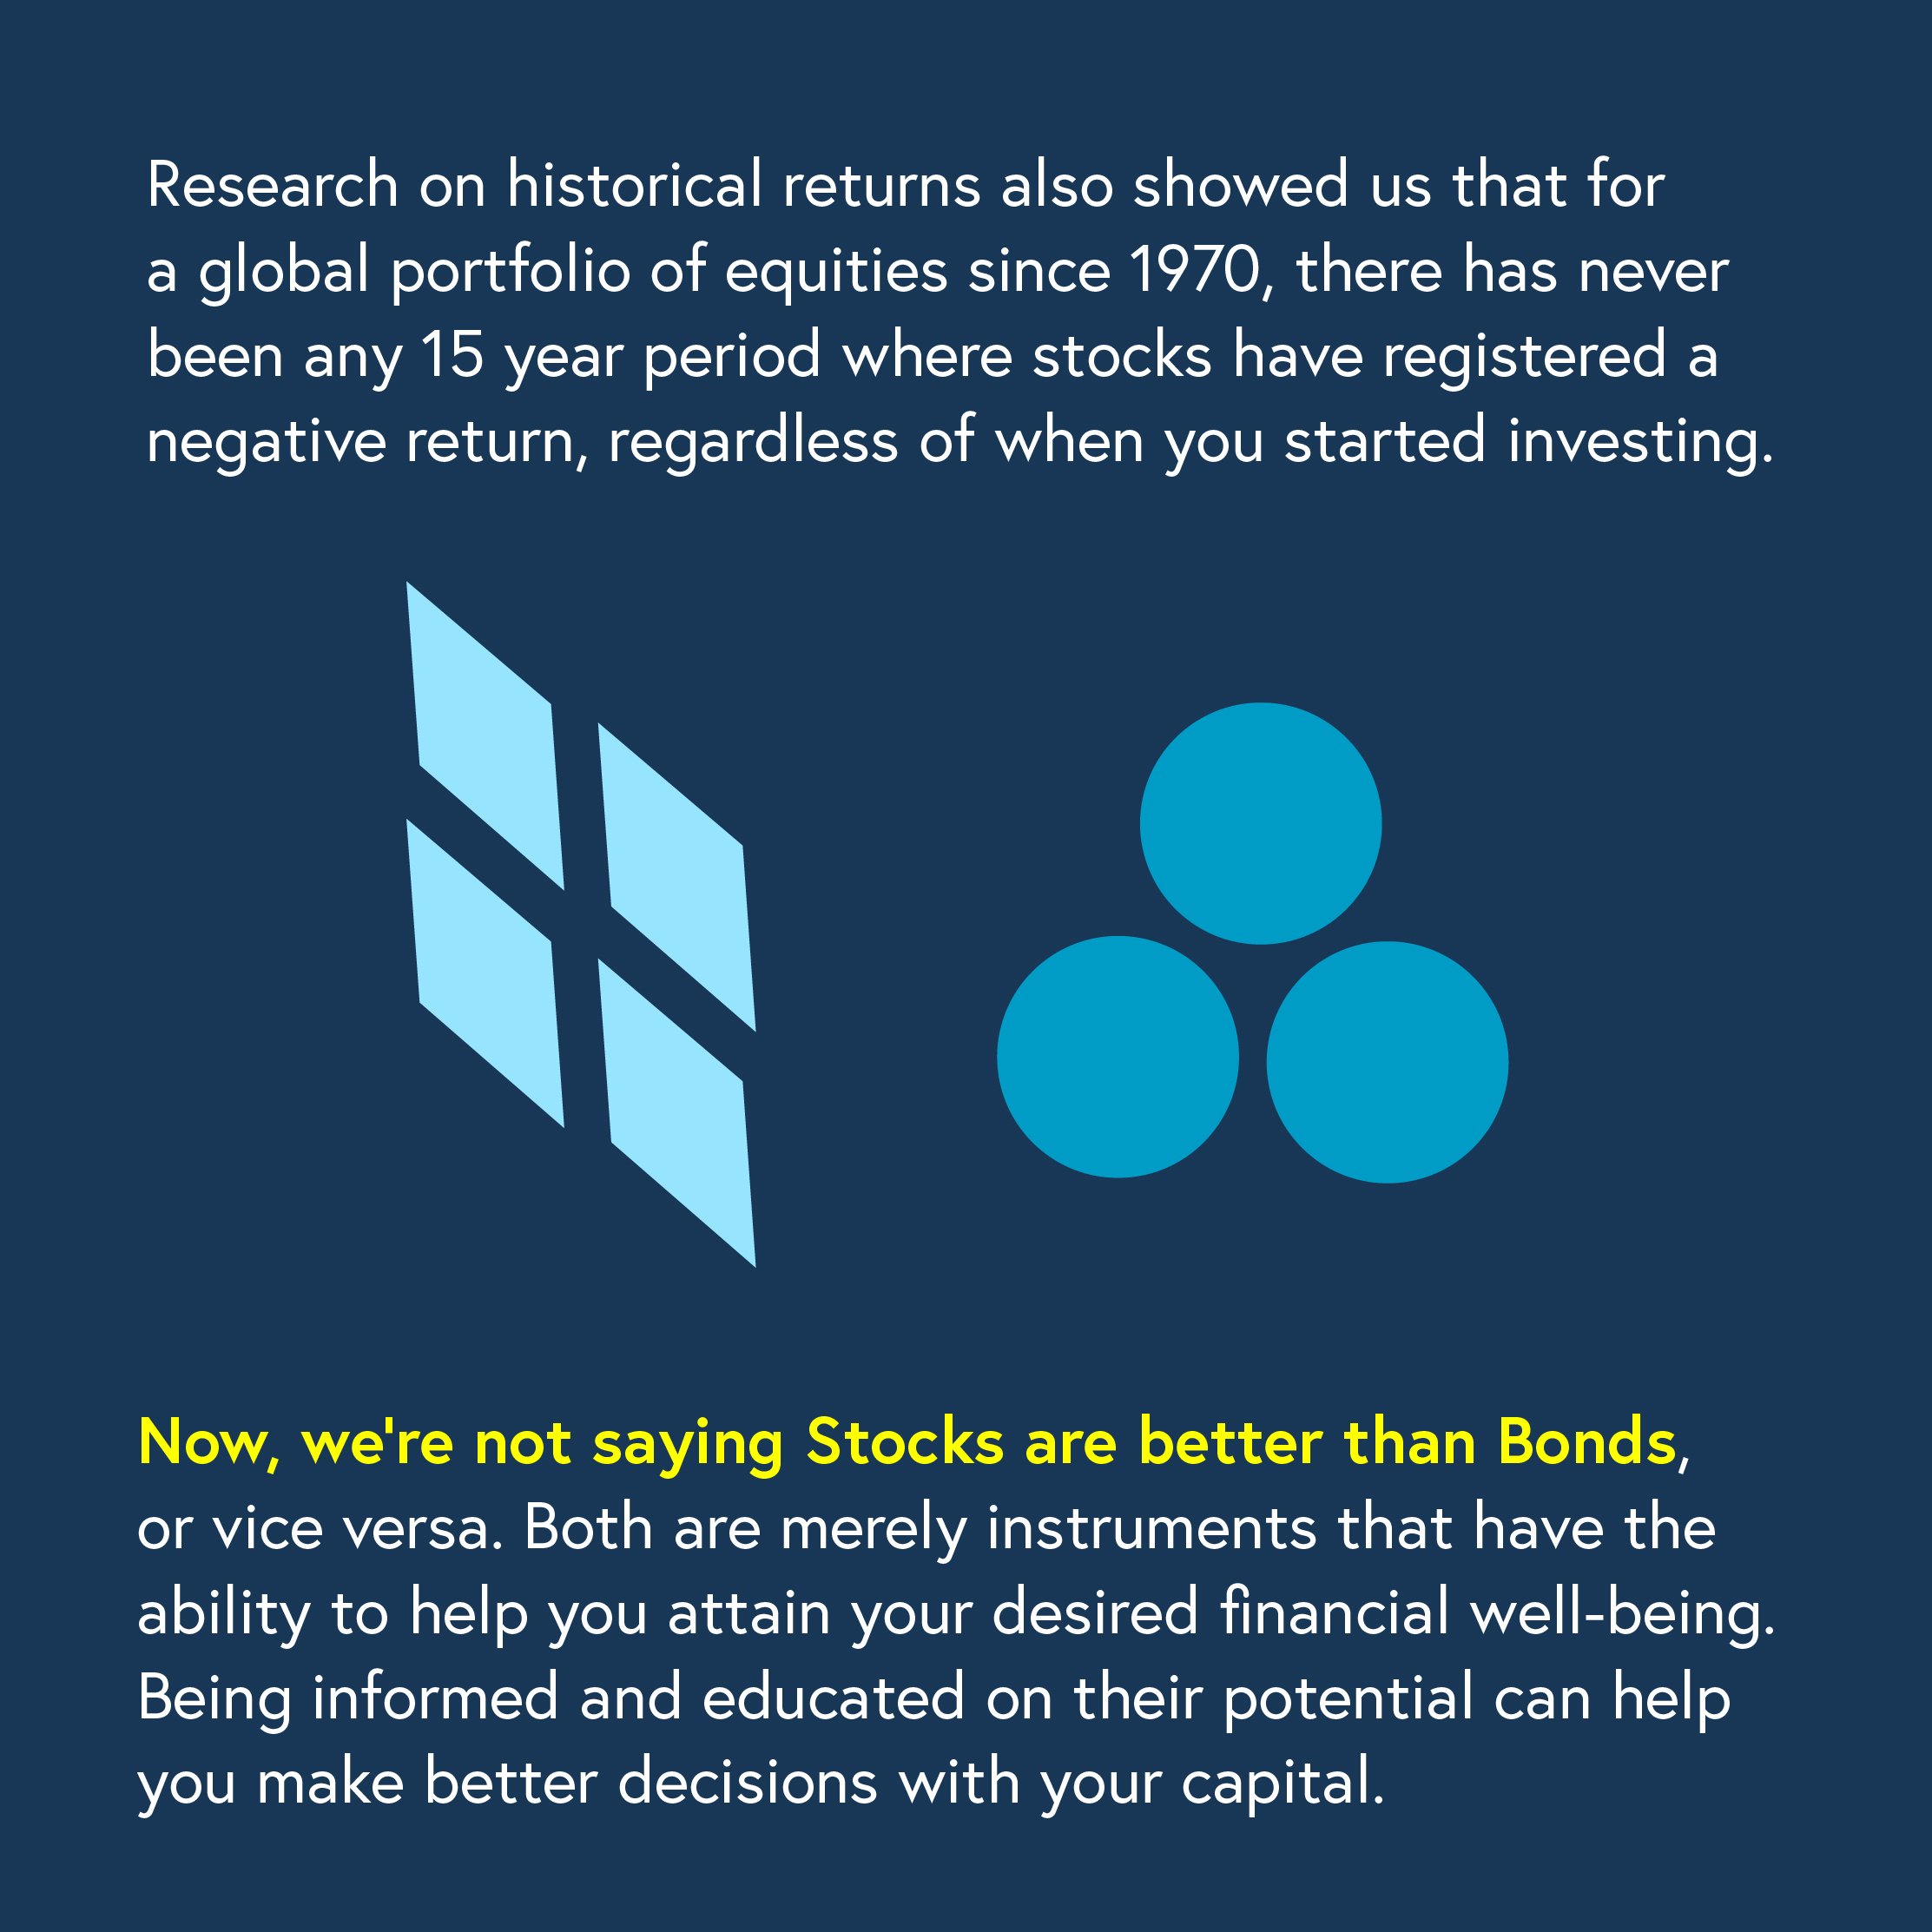 240220_Did you know that stocks can be less risky than bonds?-05.jpg